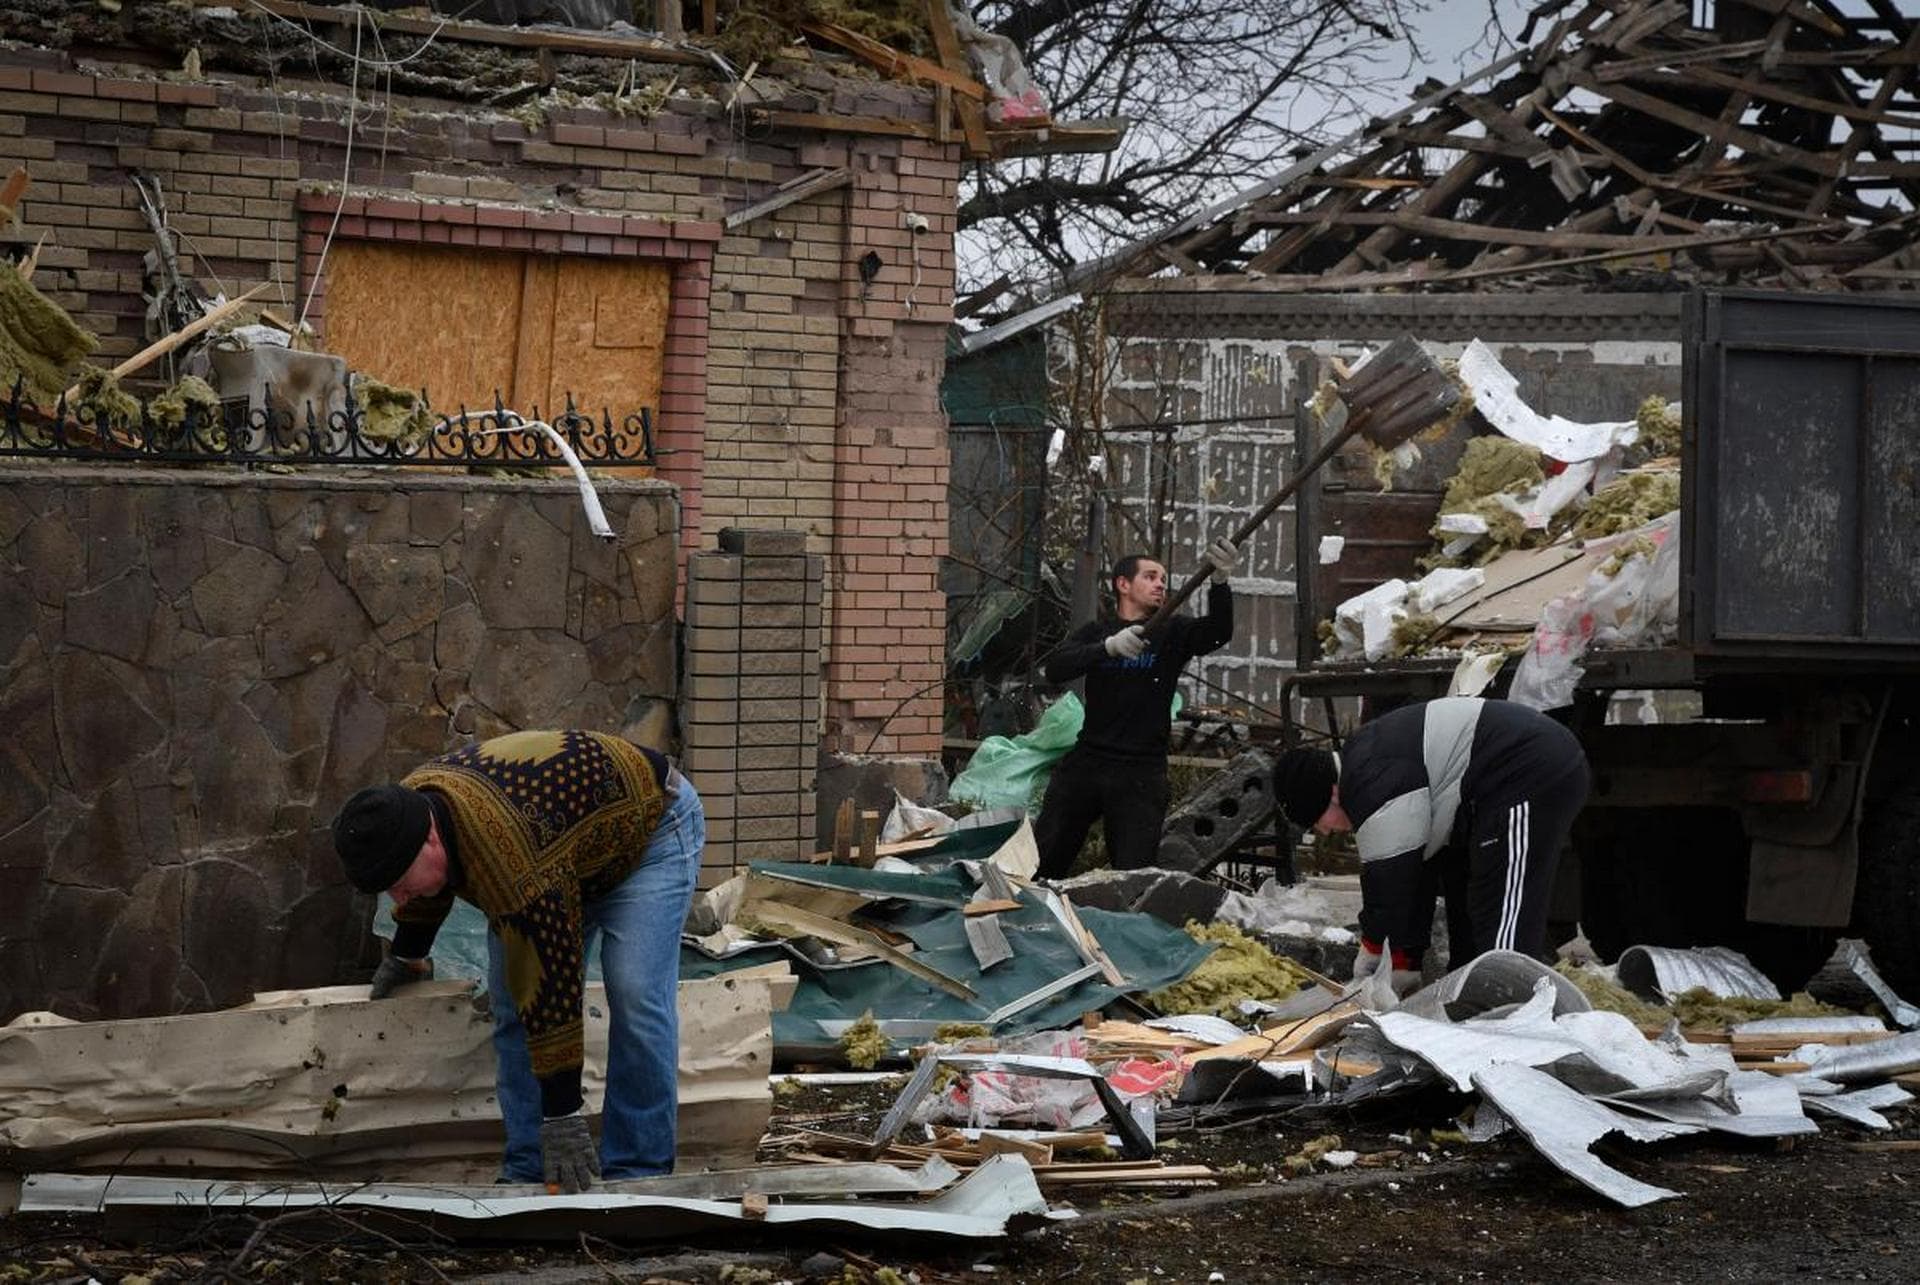 Local residents work to clean the debris from damaged house after Russian shelling in Kramatorsk